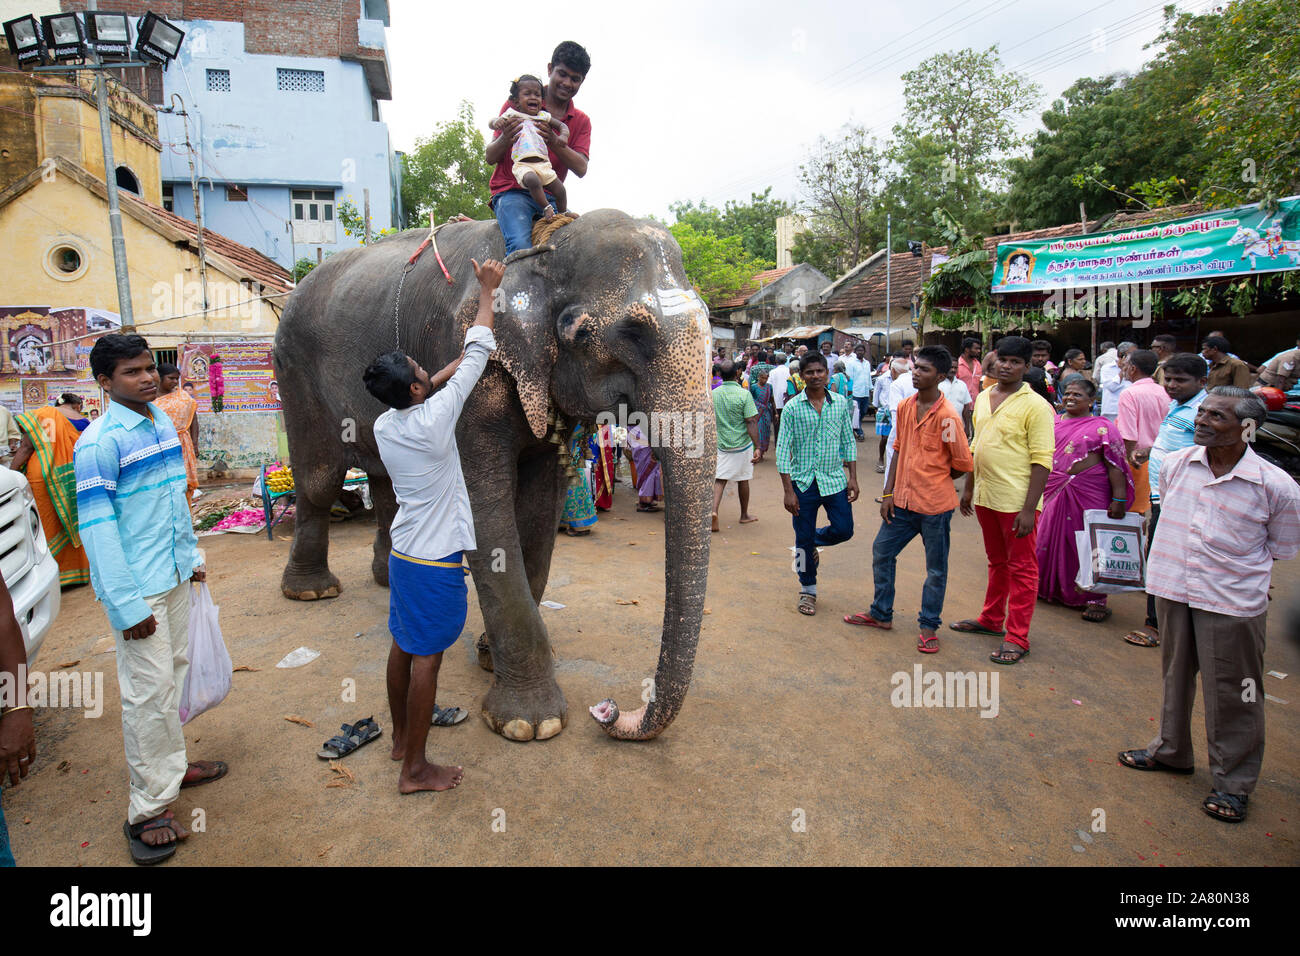 Mahout holding crying baby girl on temple elephant during Kutti Kudithal Festival in Trichy, Tamil Nadu, India Stock Photo